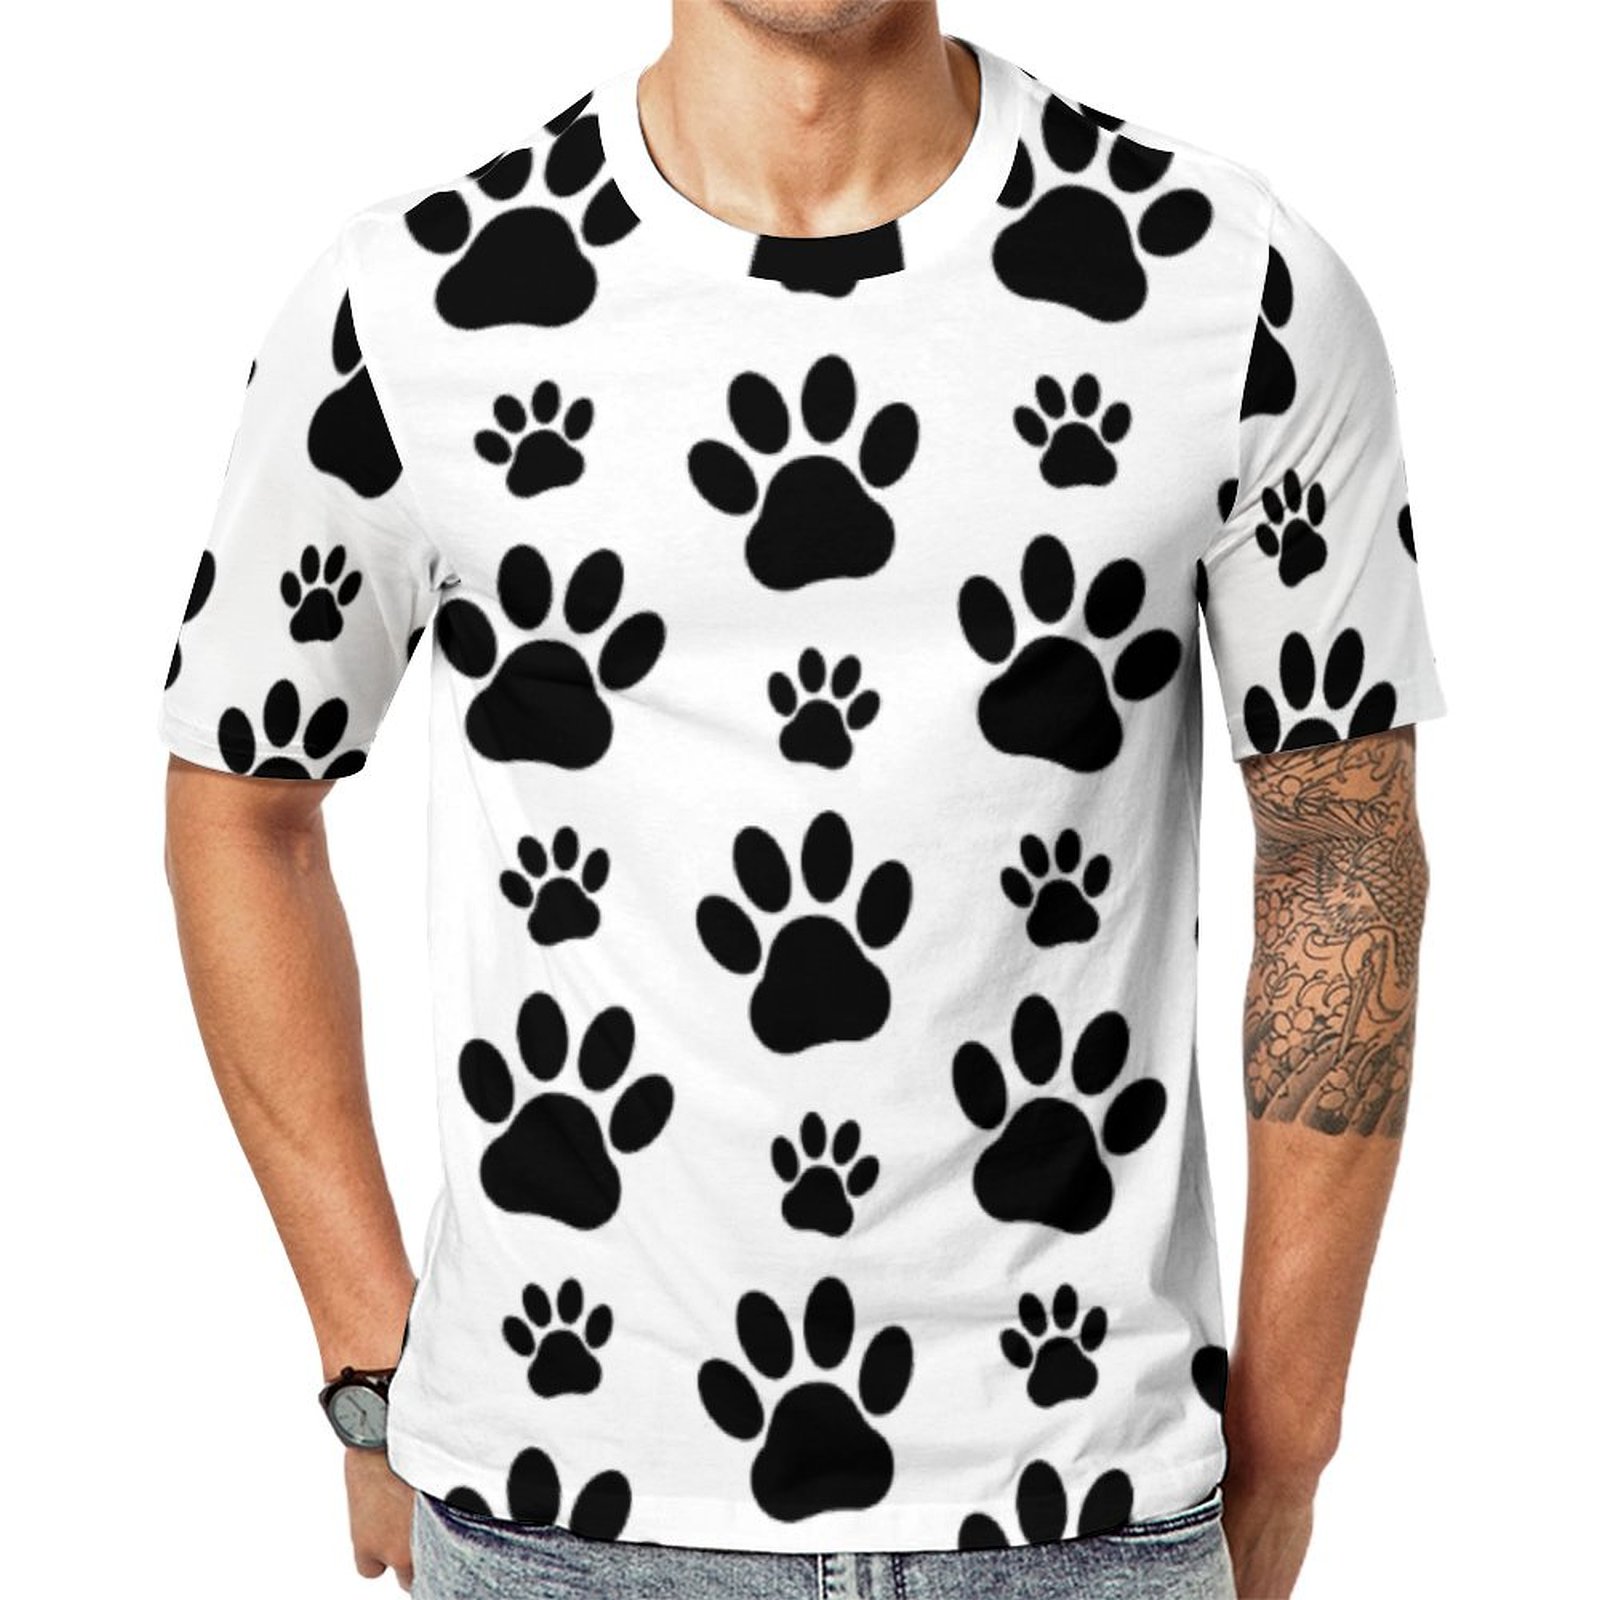 Paw Dog Prints Black And White Short Sleeve Print Unisex Tshirt Summer Casual Tees for Men and Women Coolcoshirts